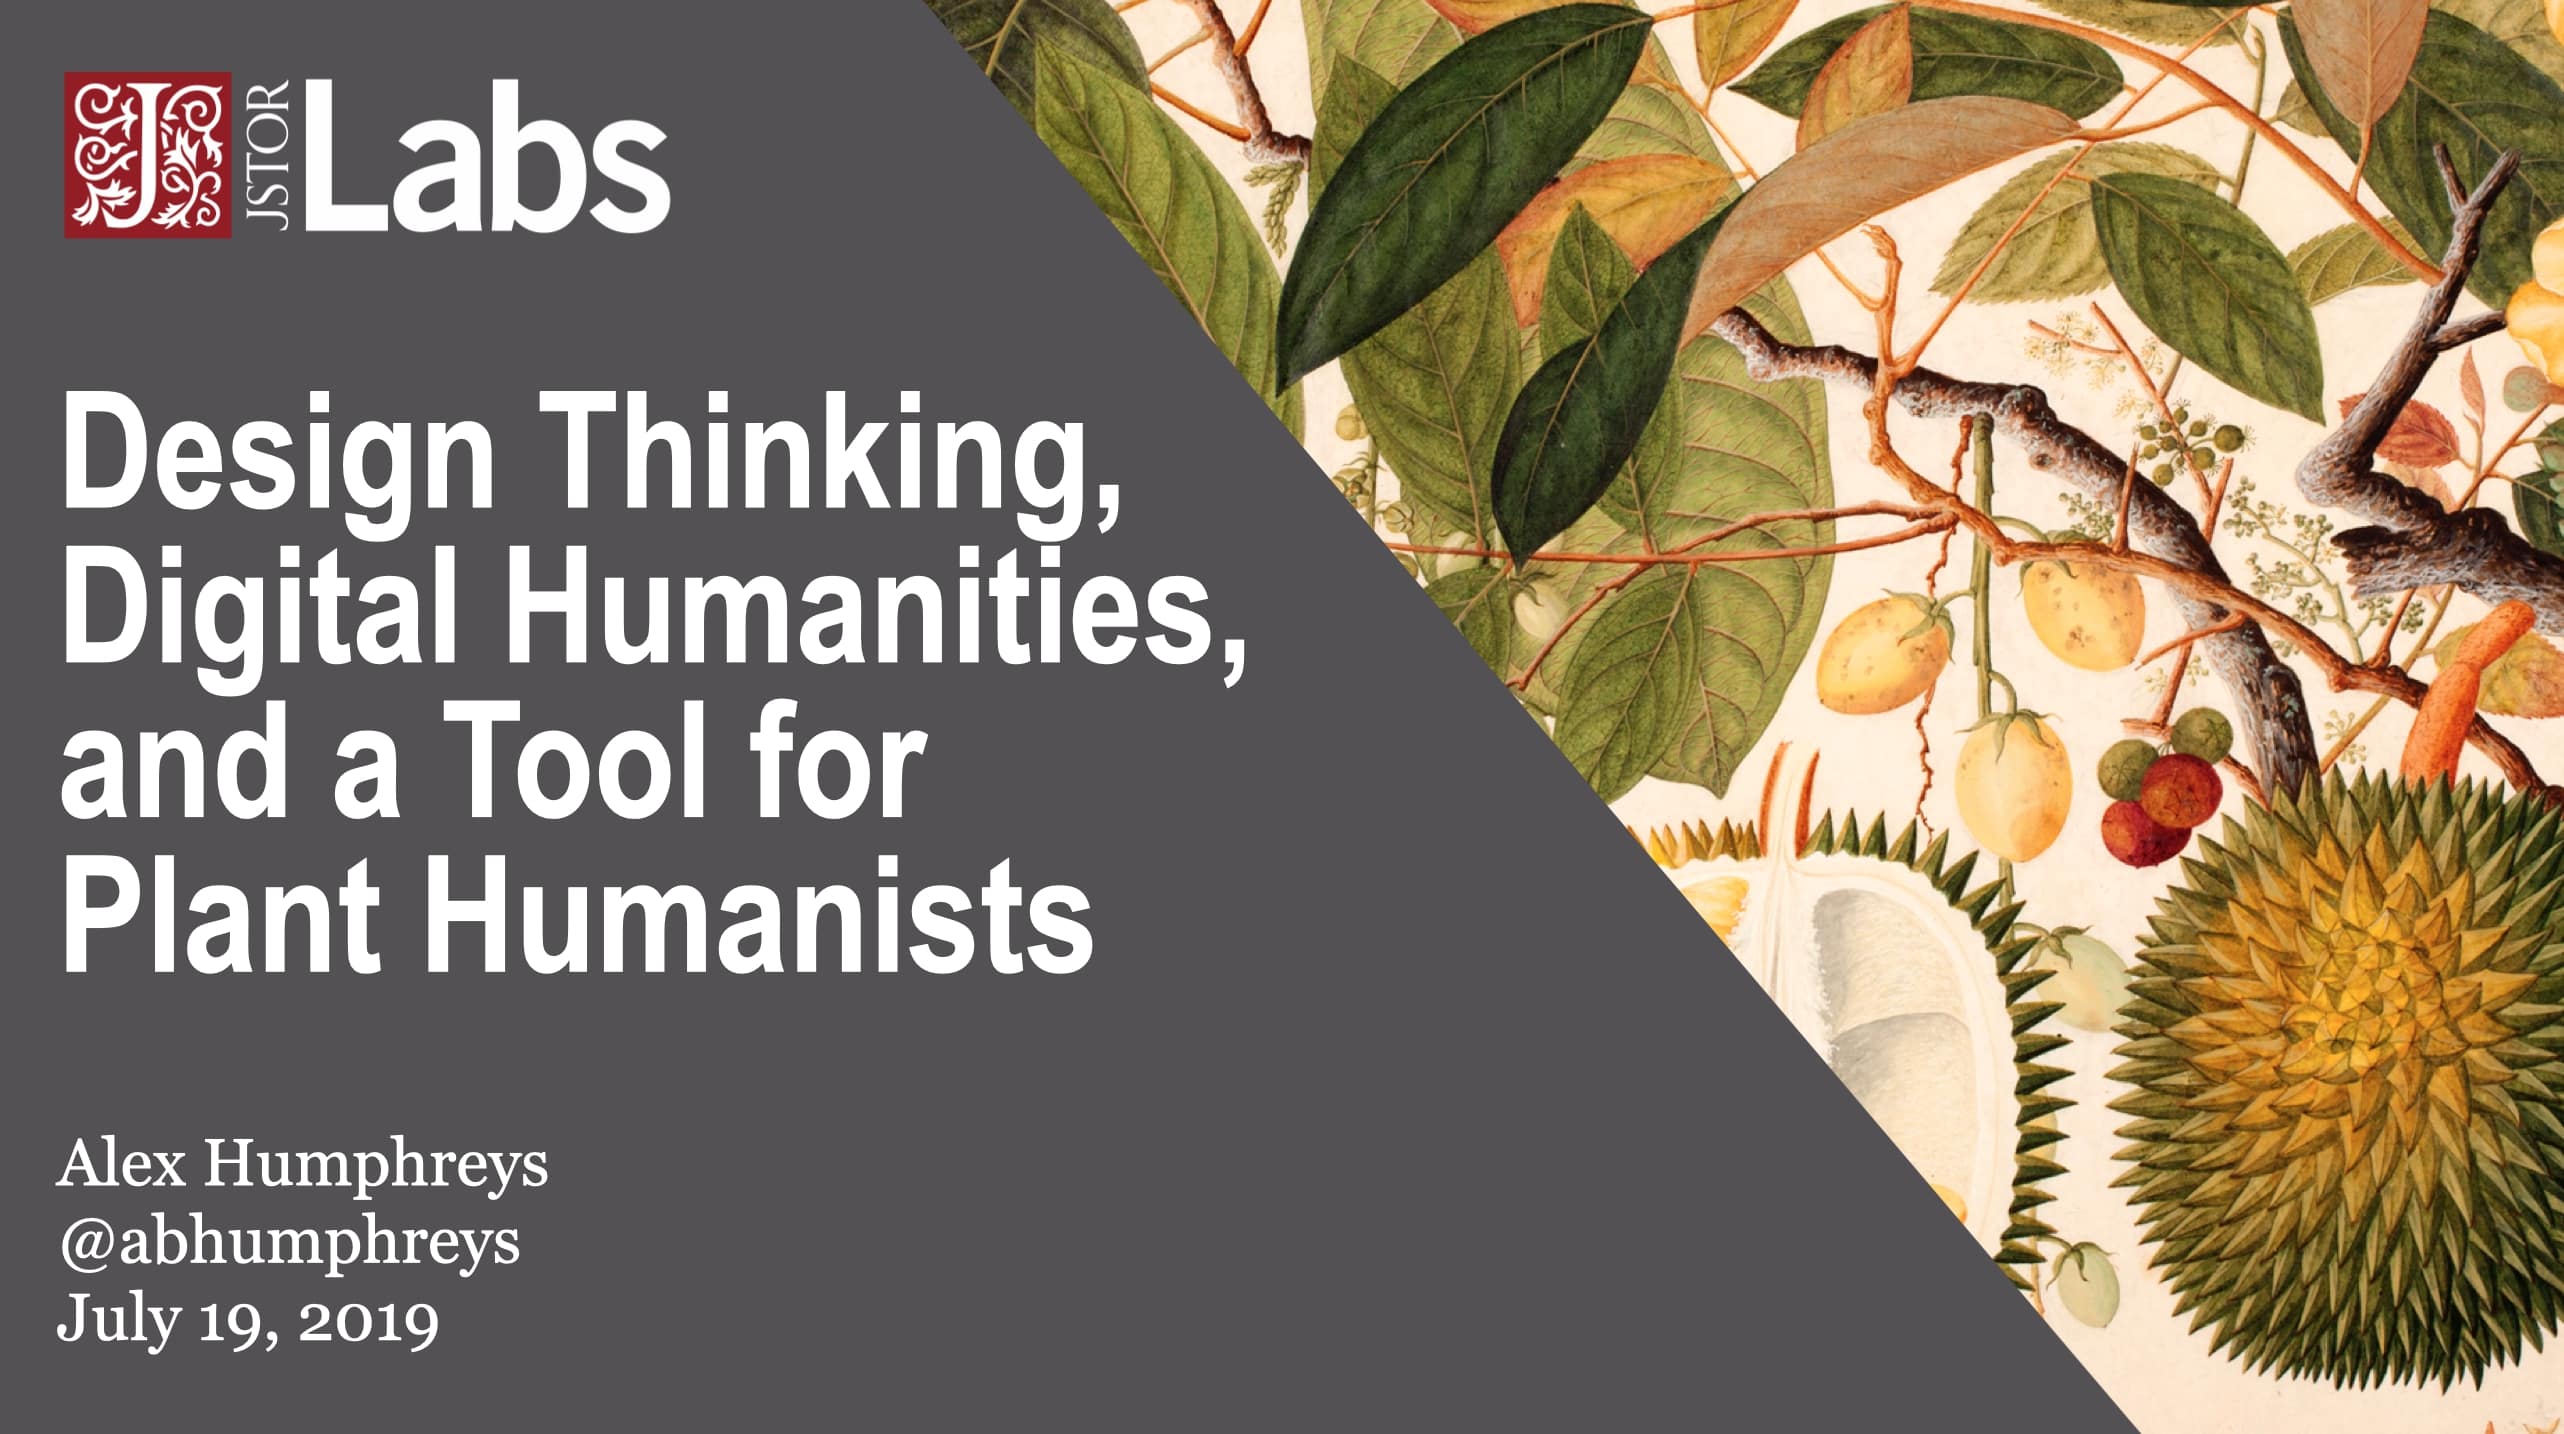 Design Thinking, Digital Humanities and a Tool for Plant Humanists